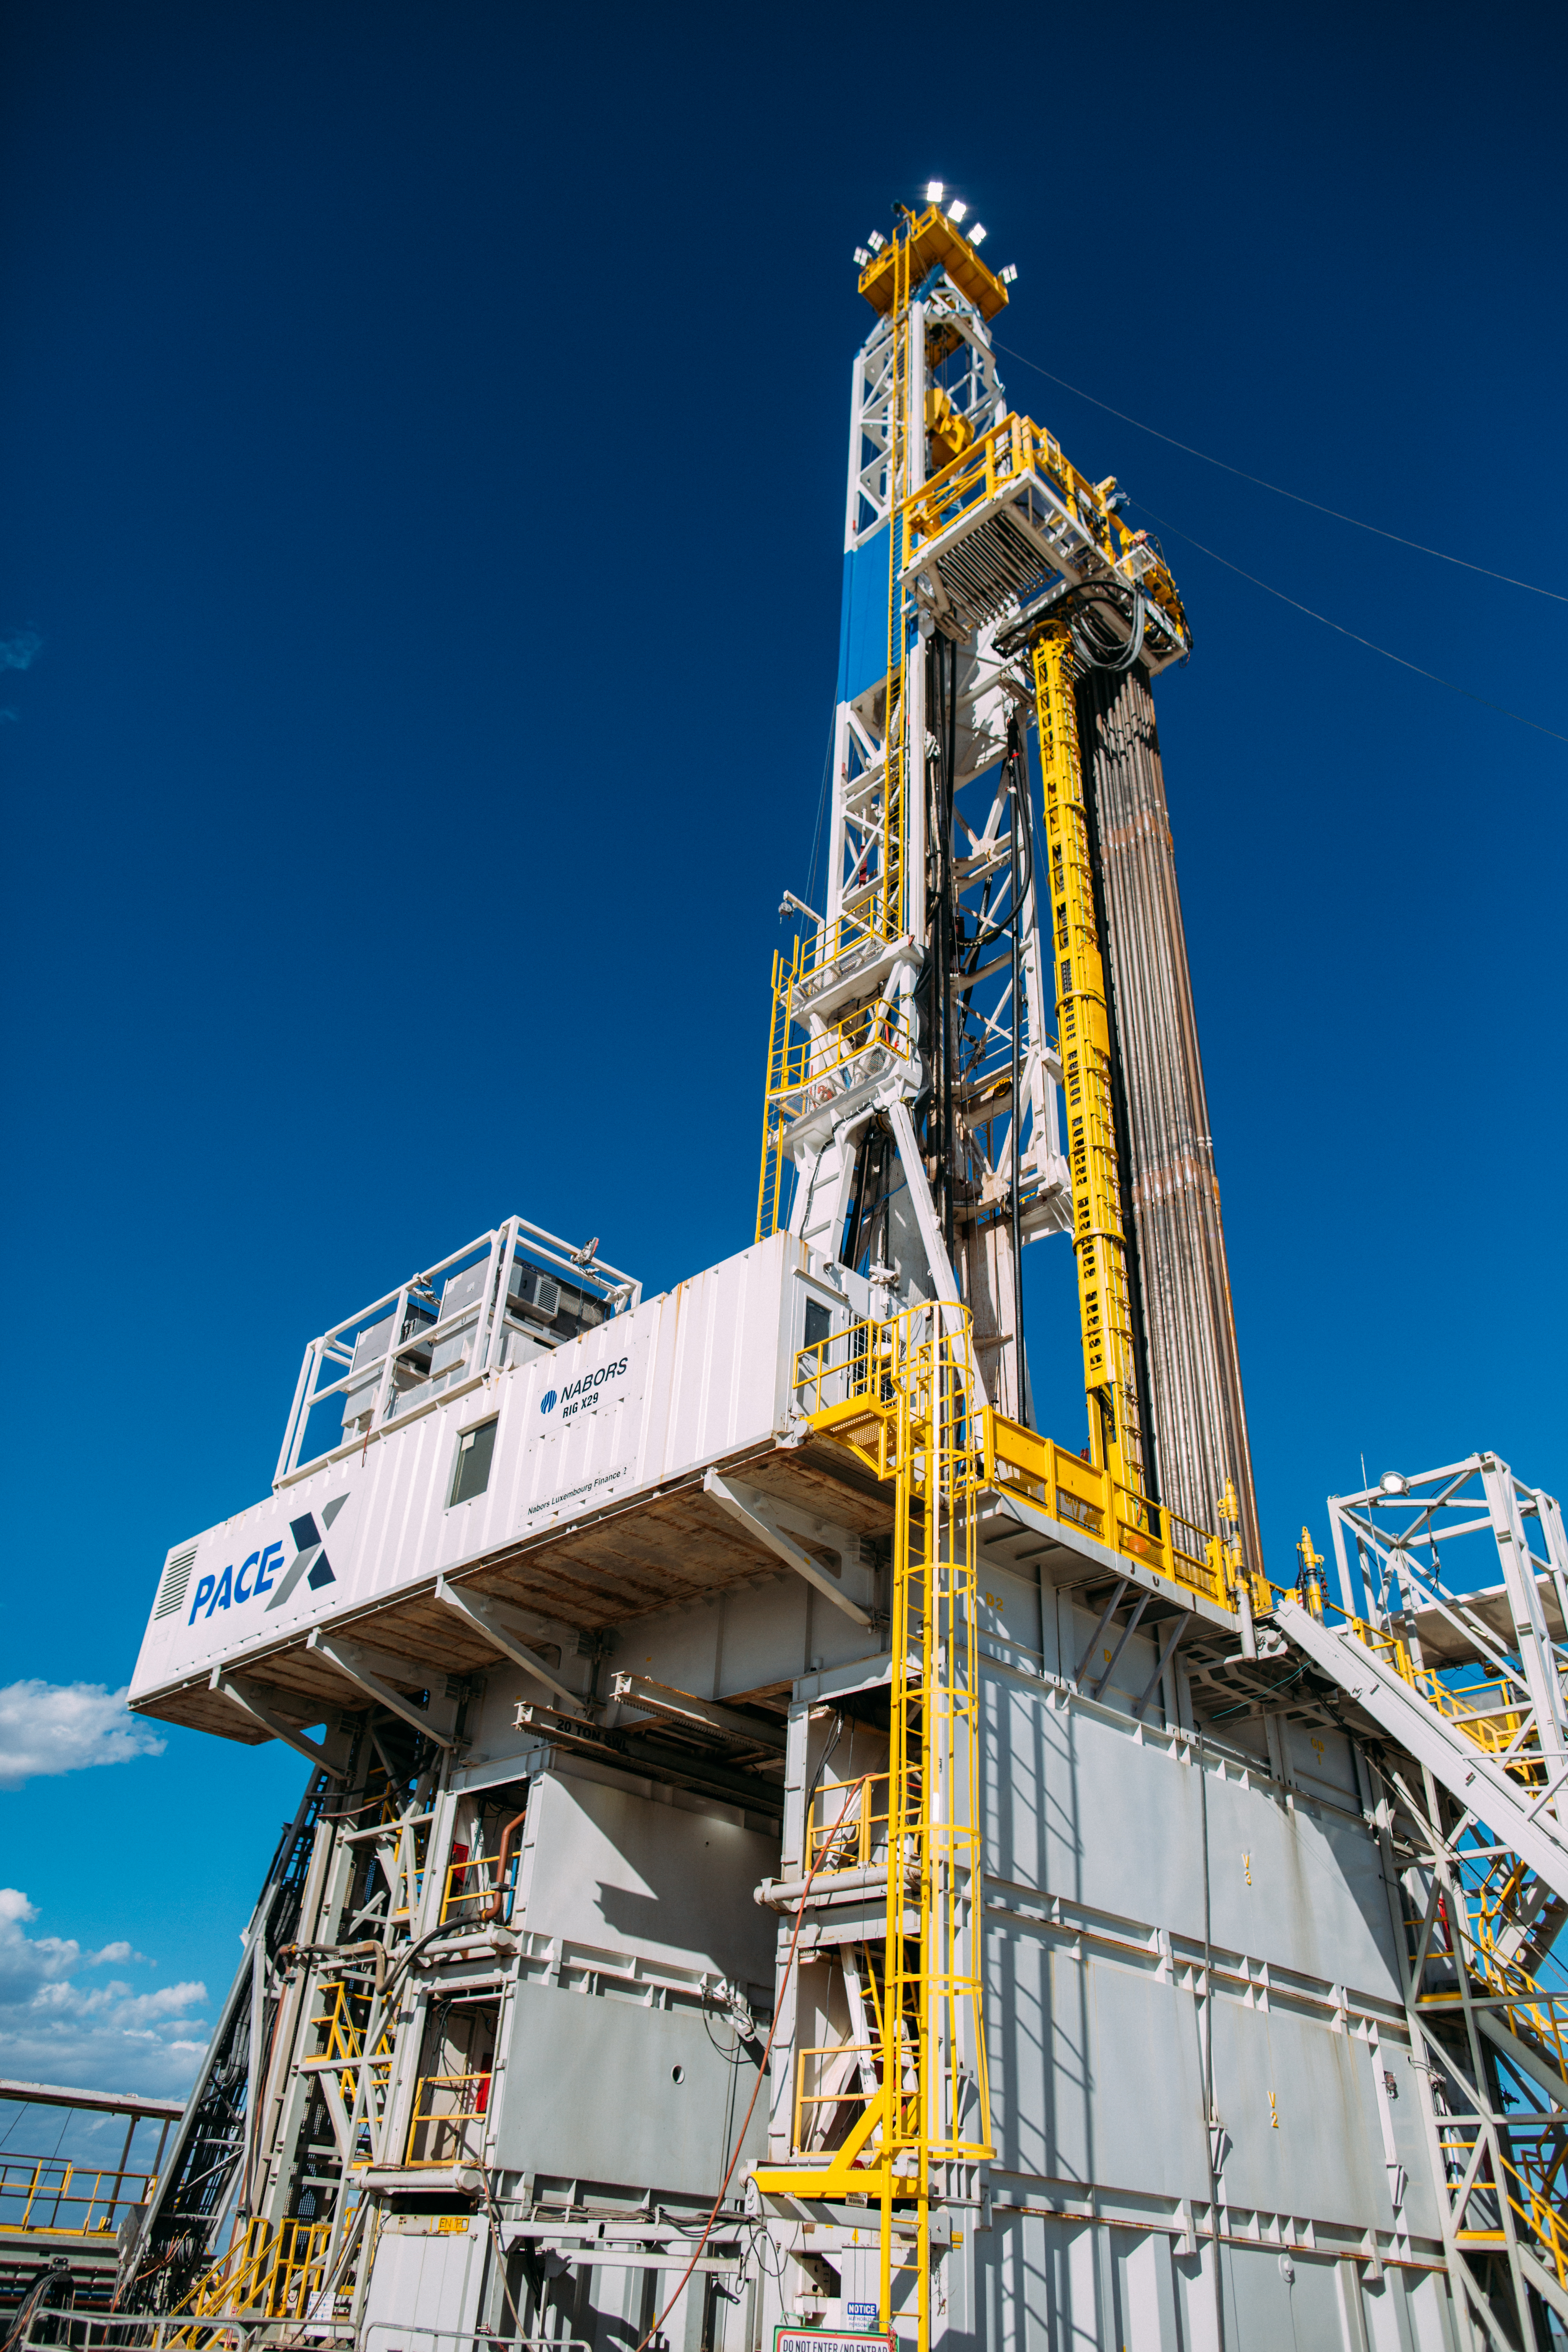 drilling faster, safer and more cost effective